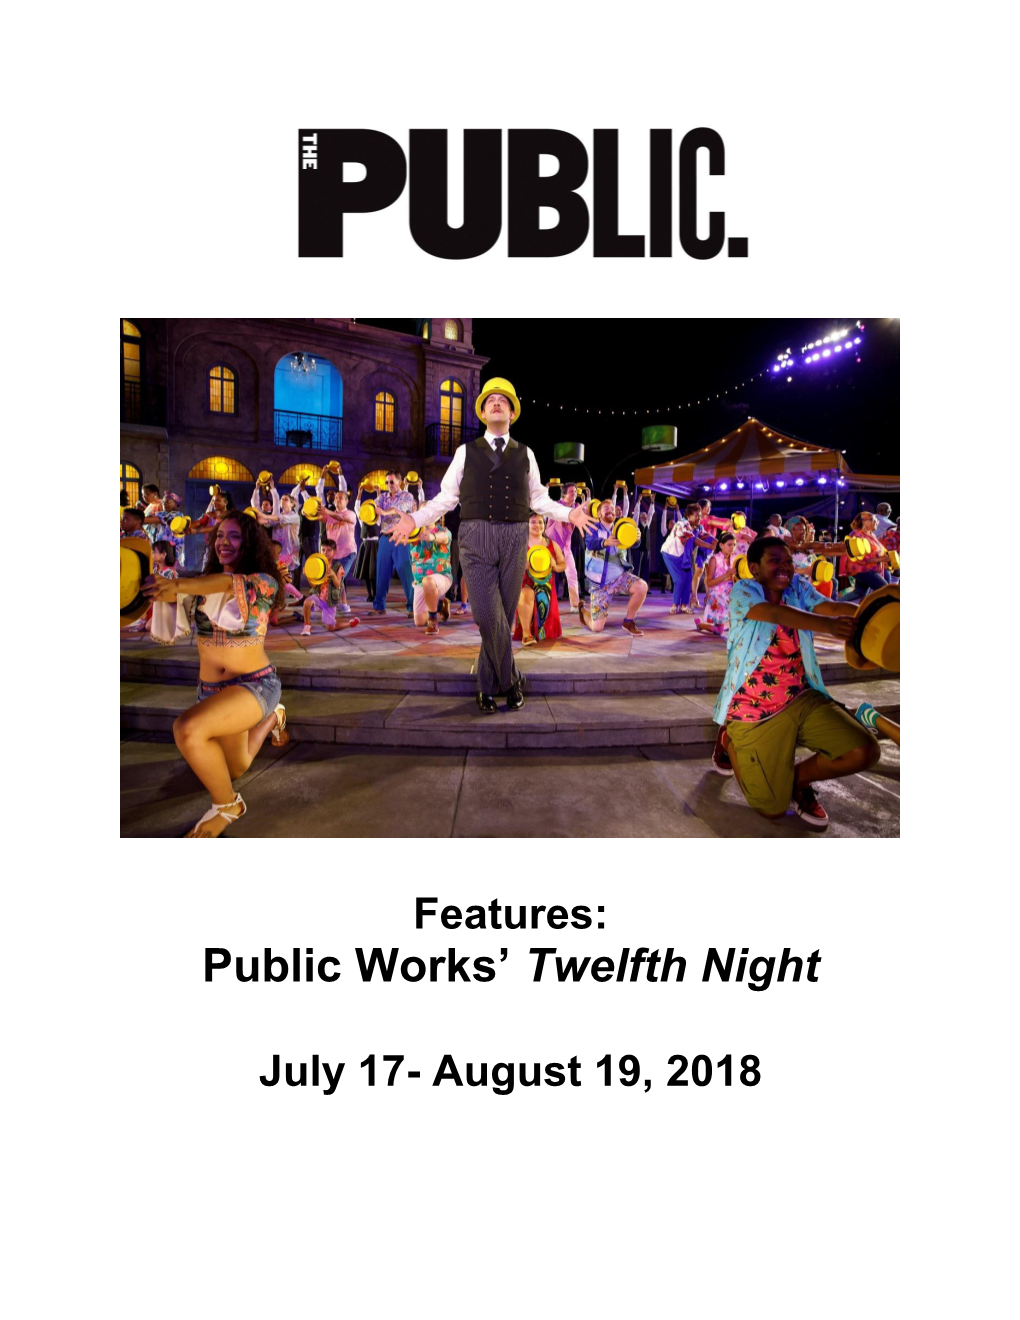 Public Works' Twelfth Night and Interviews the Director of Public Works, Laurie Woolery, on Art Accessibility